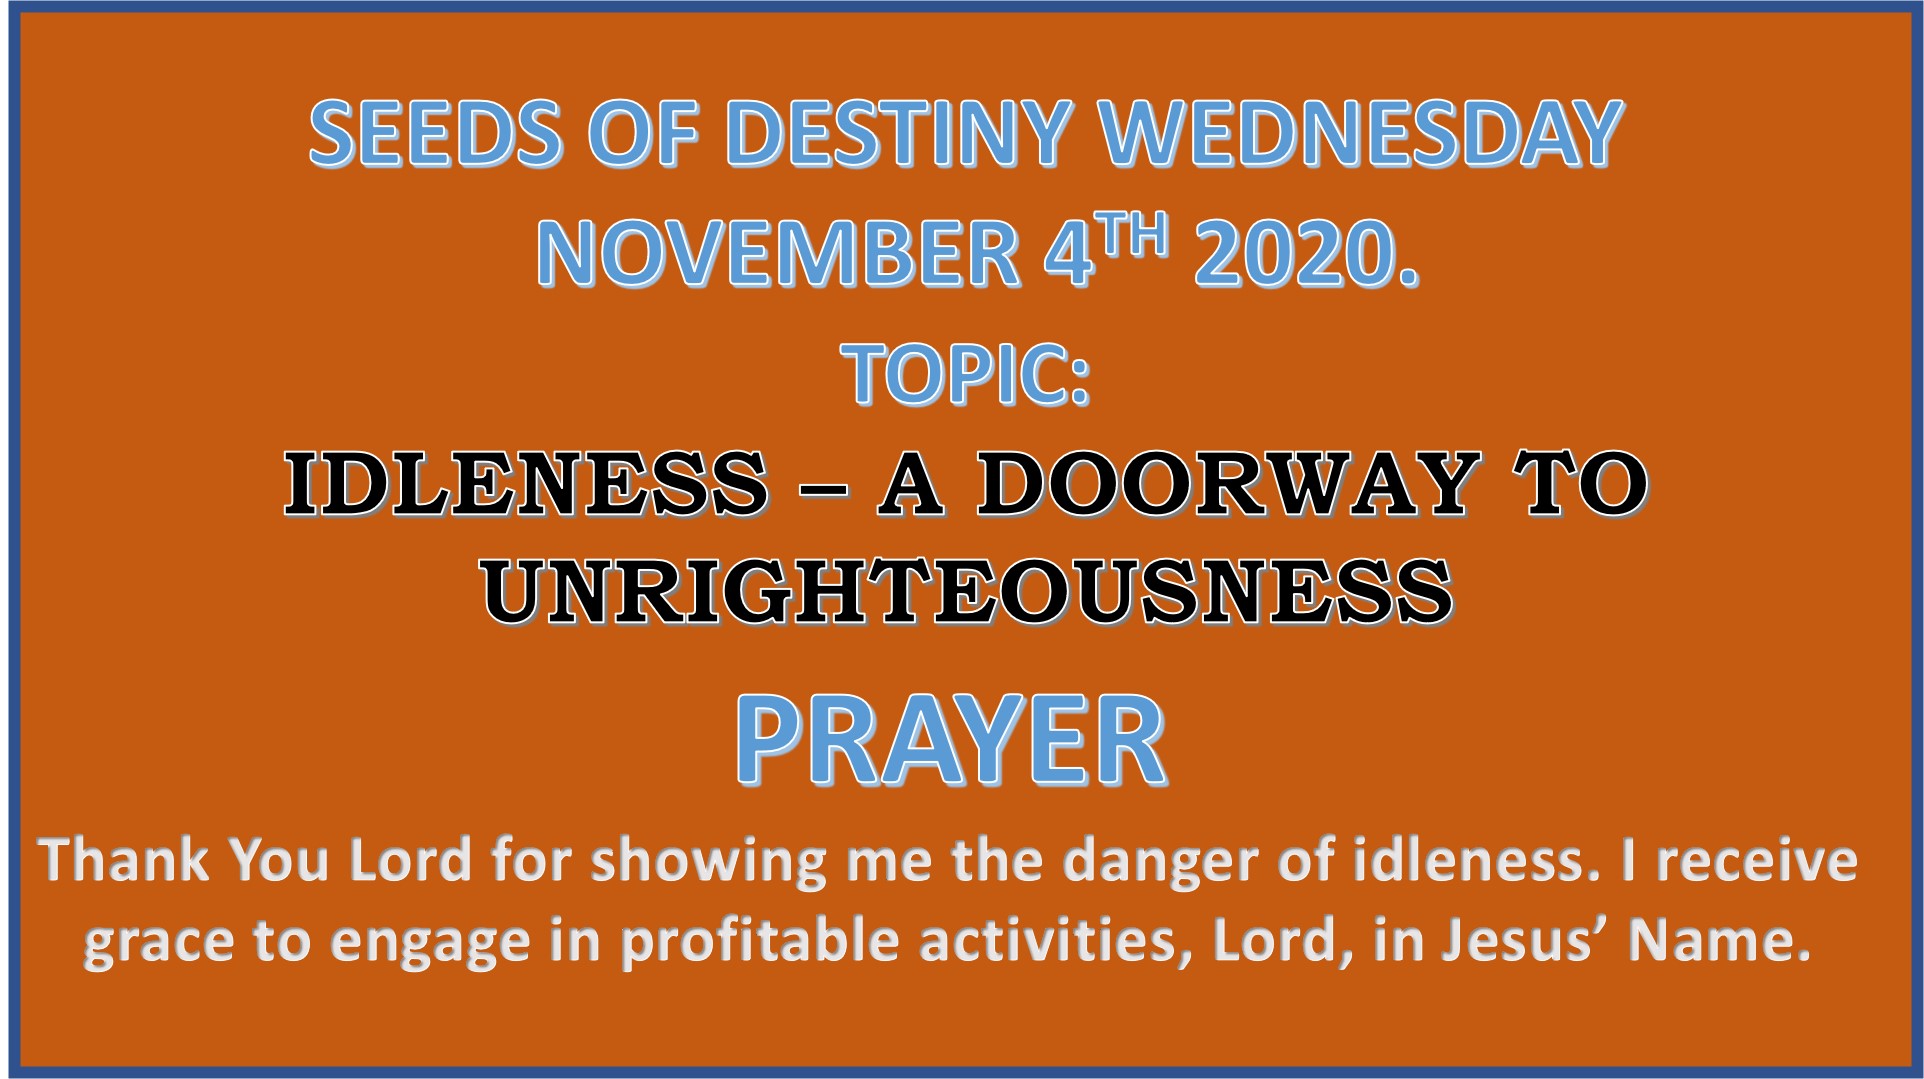 Seeds of Destiny Wednesday 4th November 2020 by Dr Paul Enenche